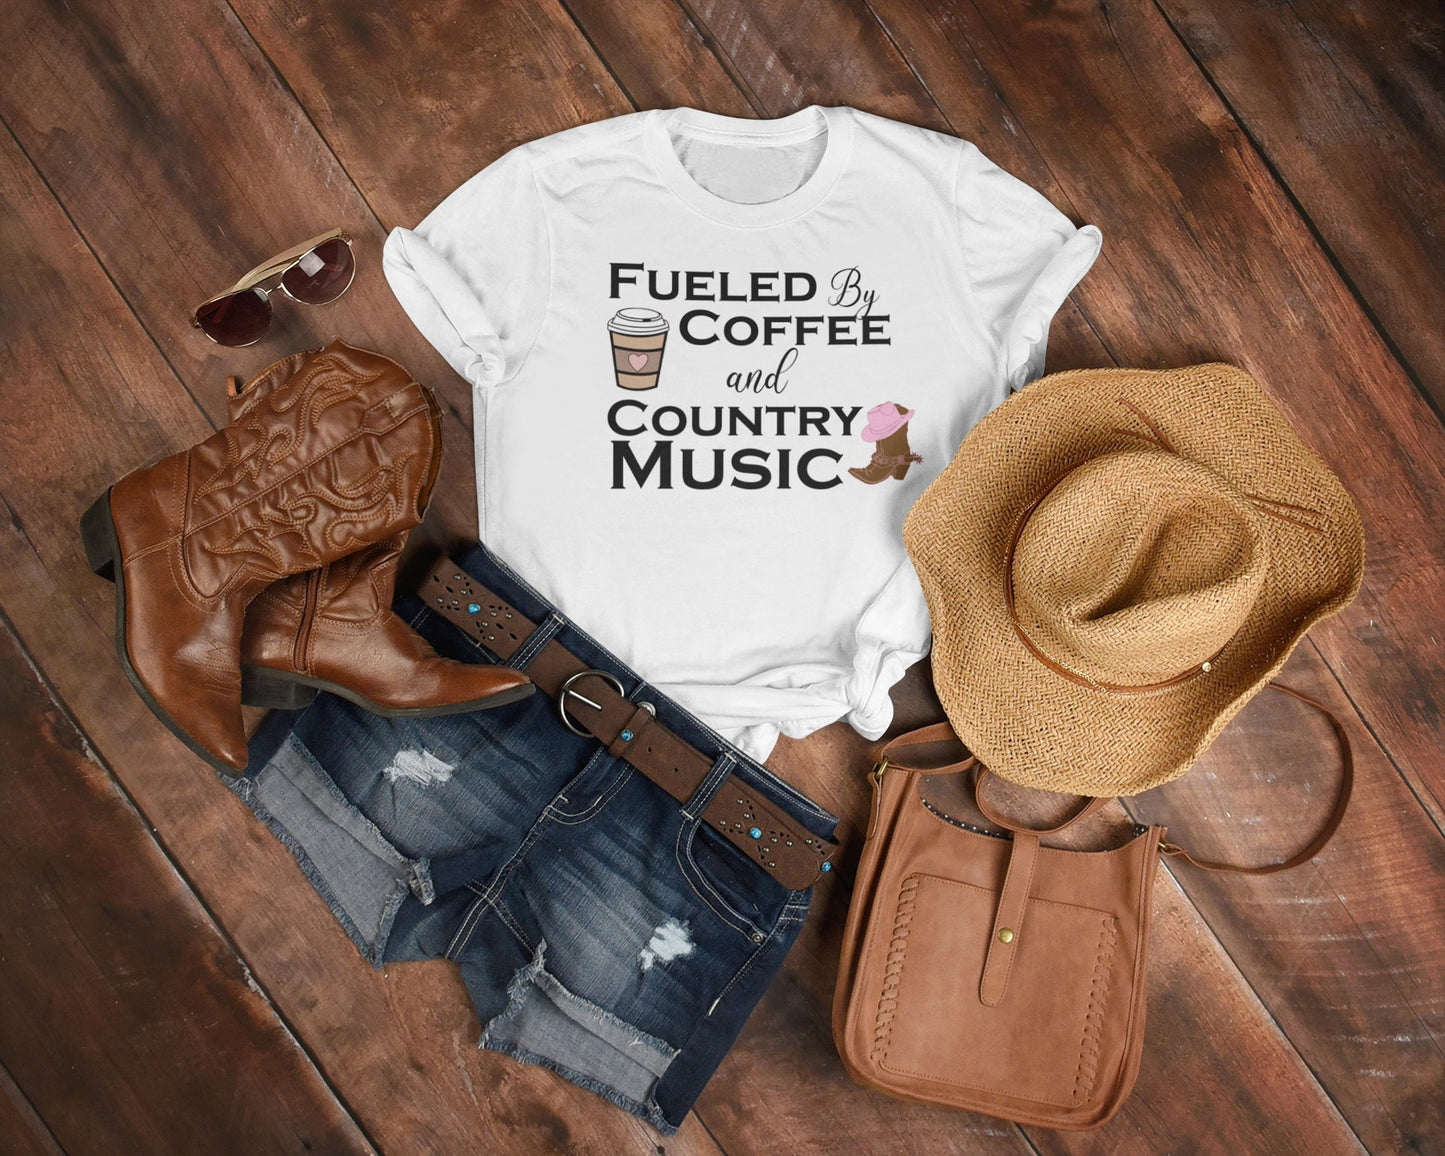 Fueled By Coffee and Country Music Shirt, Trendy Shirt, Coffee Shirt, Music Shirt, Women's Shirt, Mom Life Shirt, Gift for Her